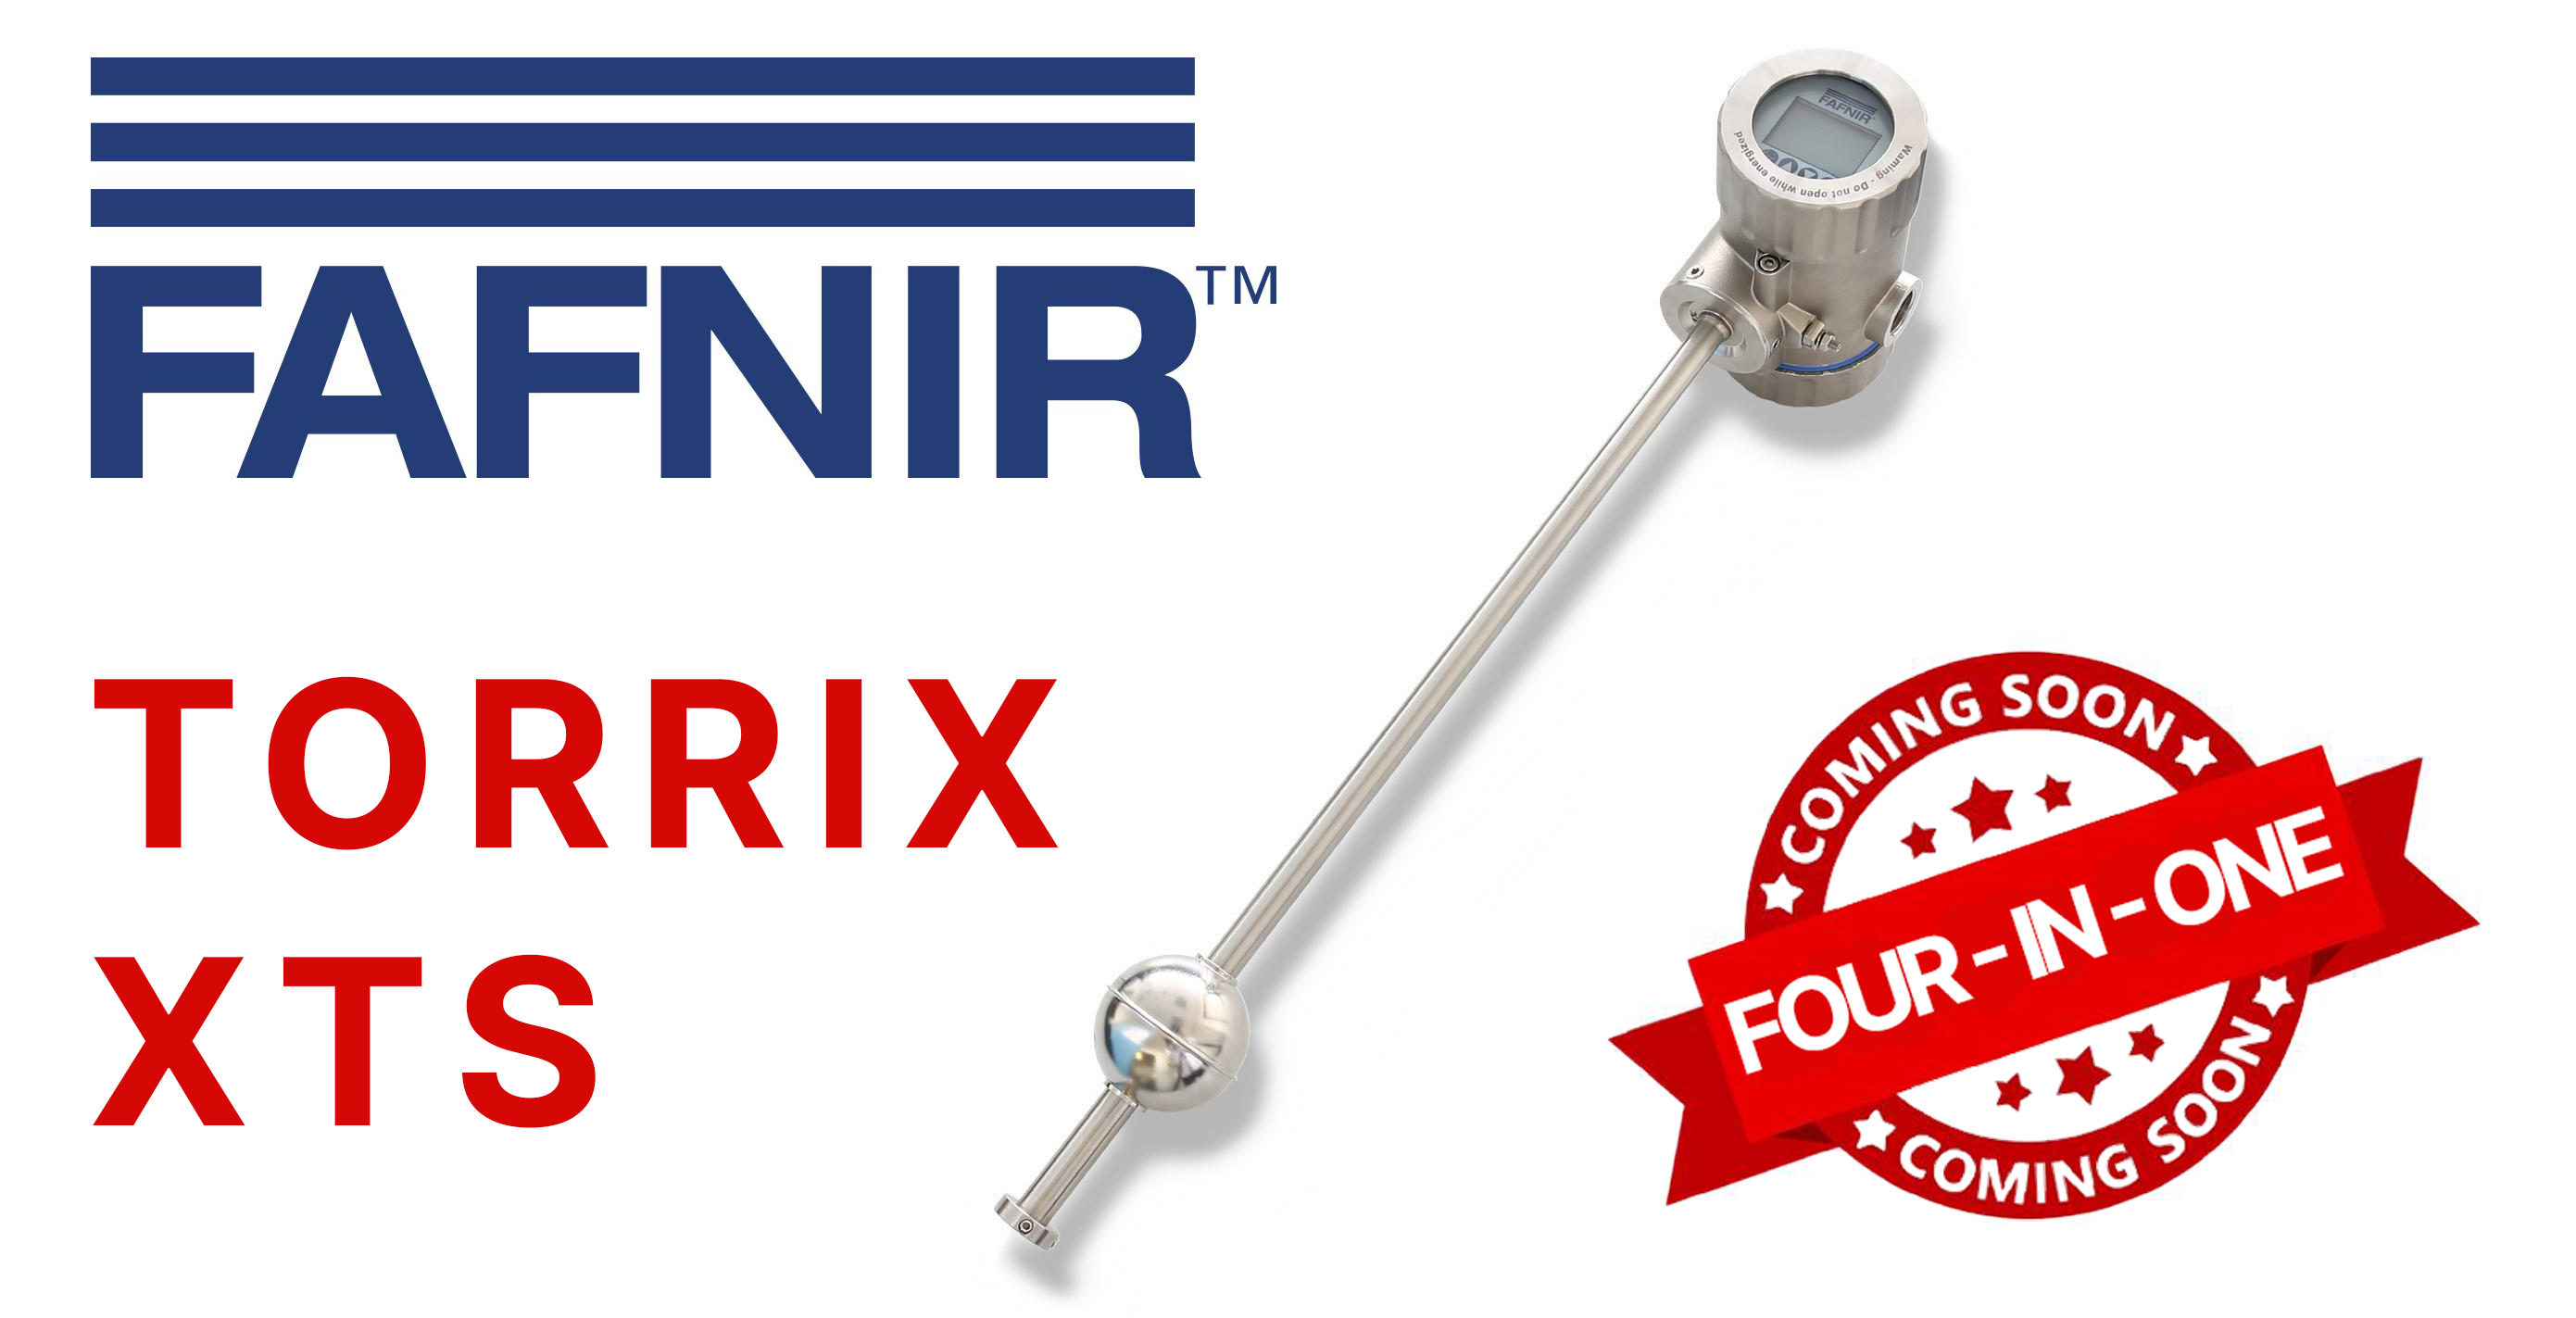 BRAND-NEW “TORRIX XTS” – The All-Rounder in level measurement!